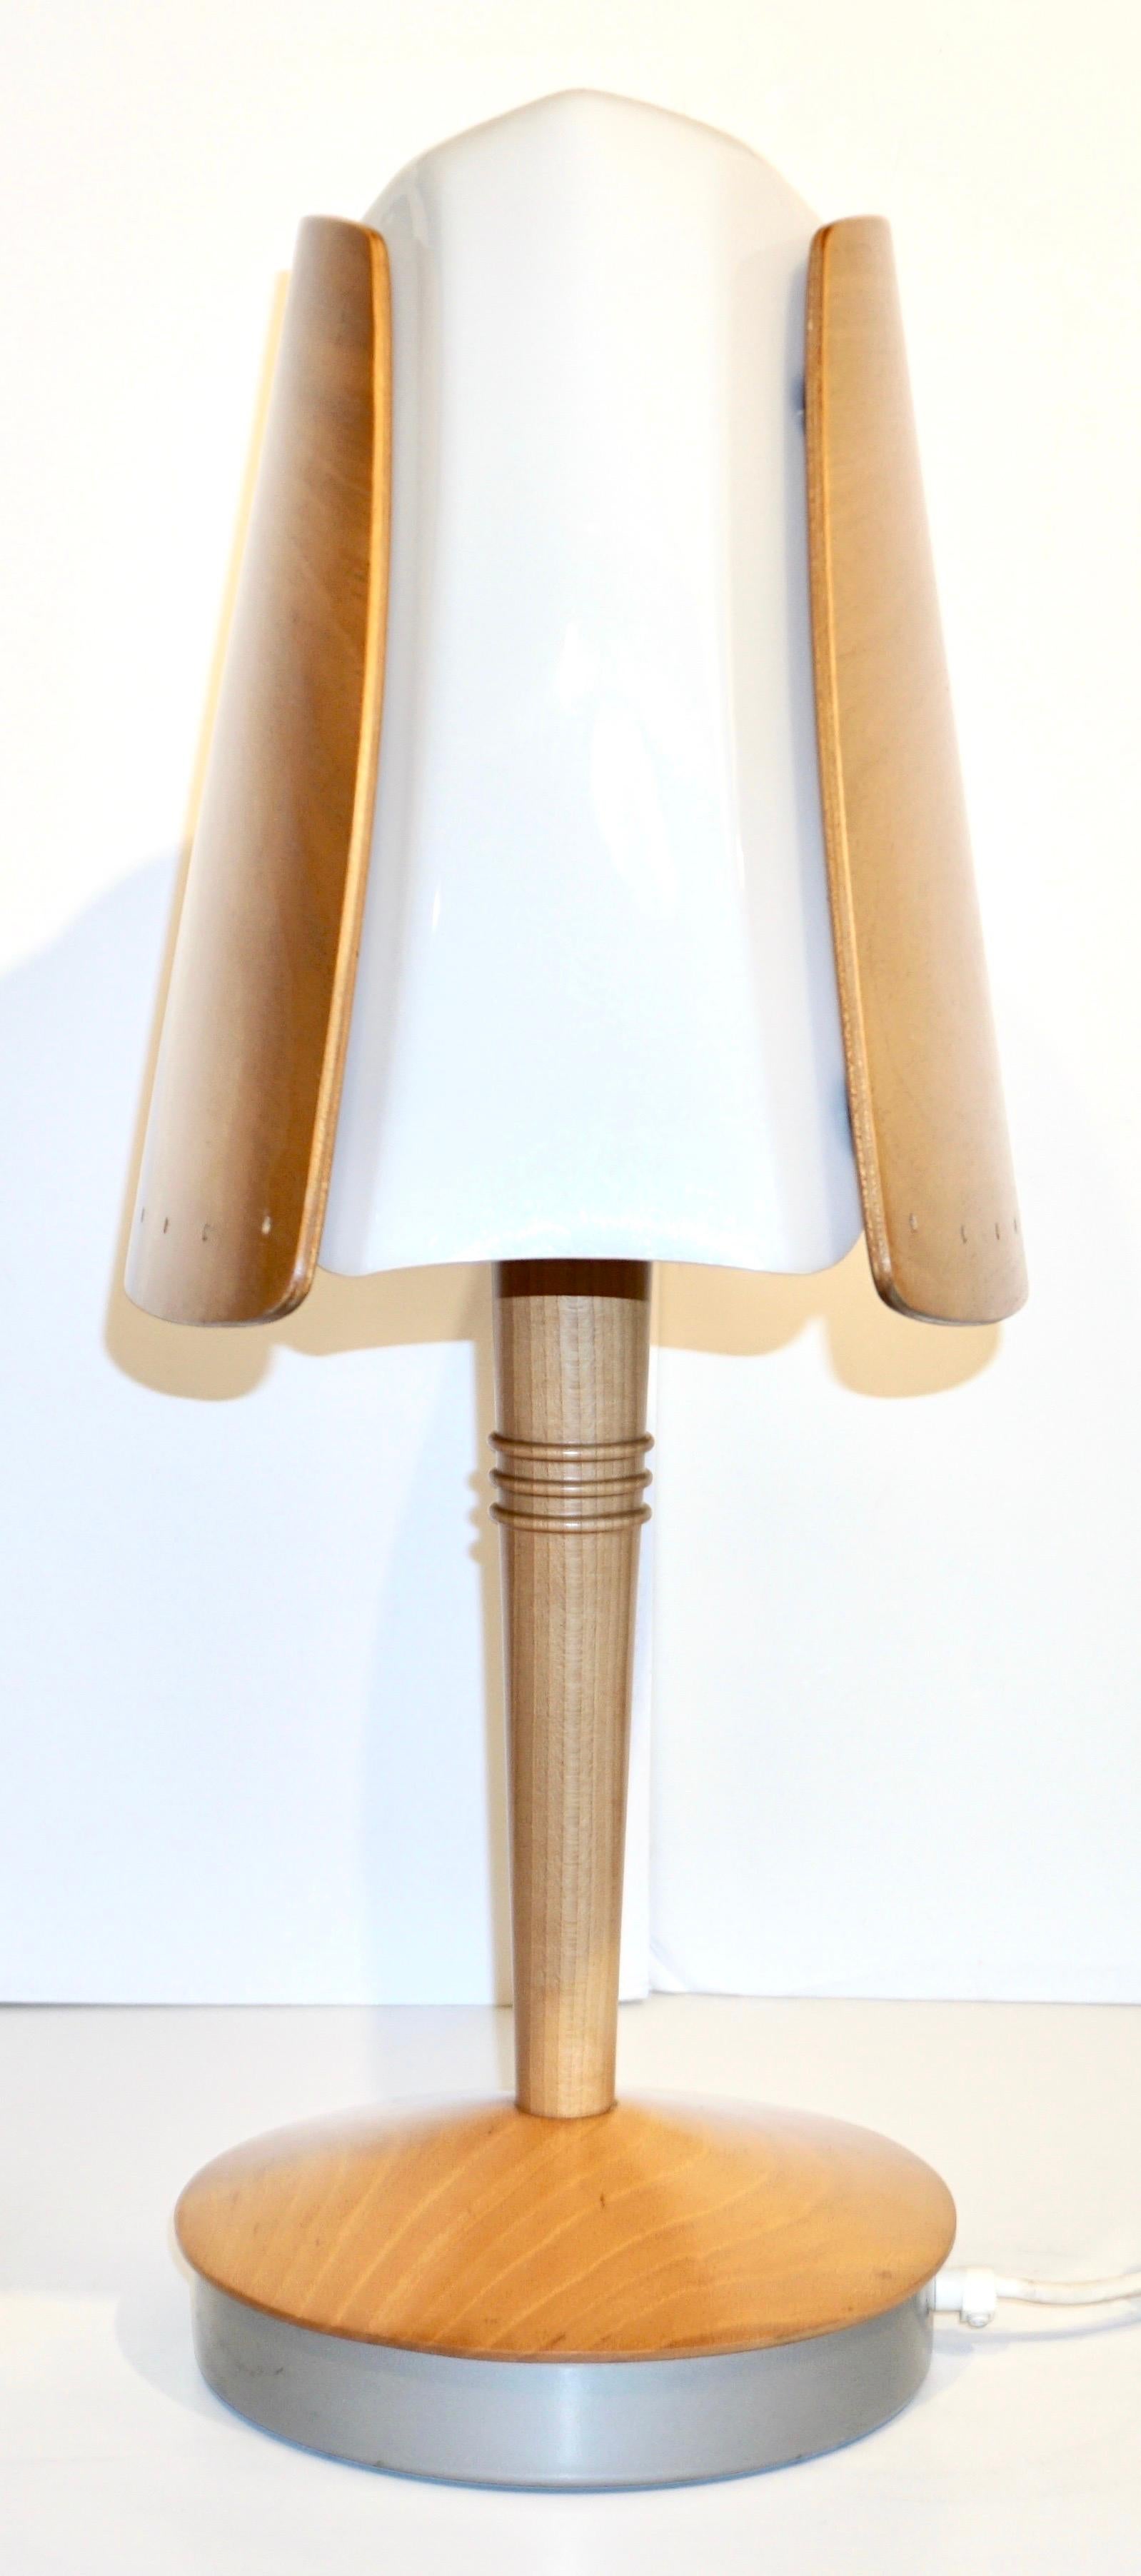 1970 French Pair of Birch Wood and Acrylic Table Lamp for Barcelona Hilton Hotel For Sale 9